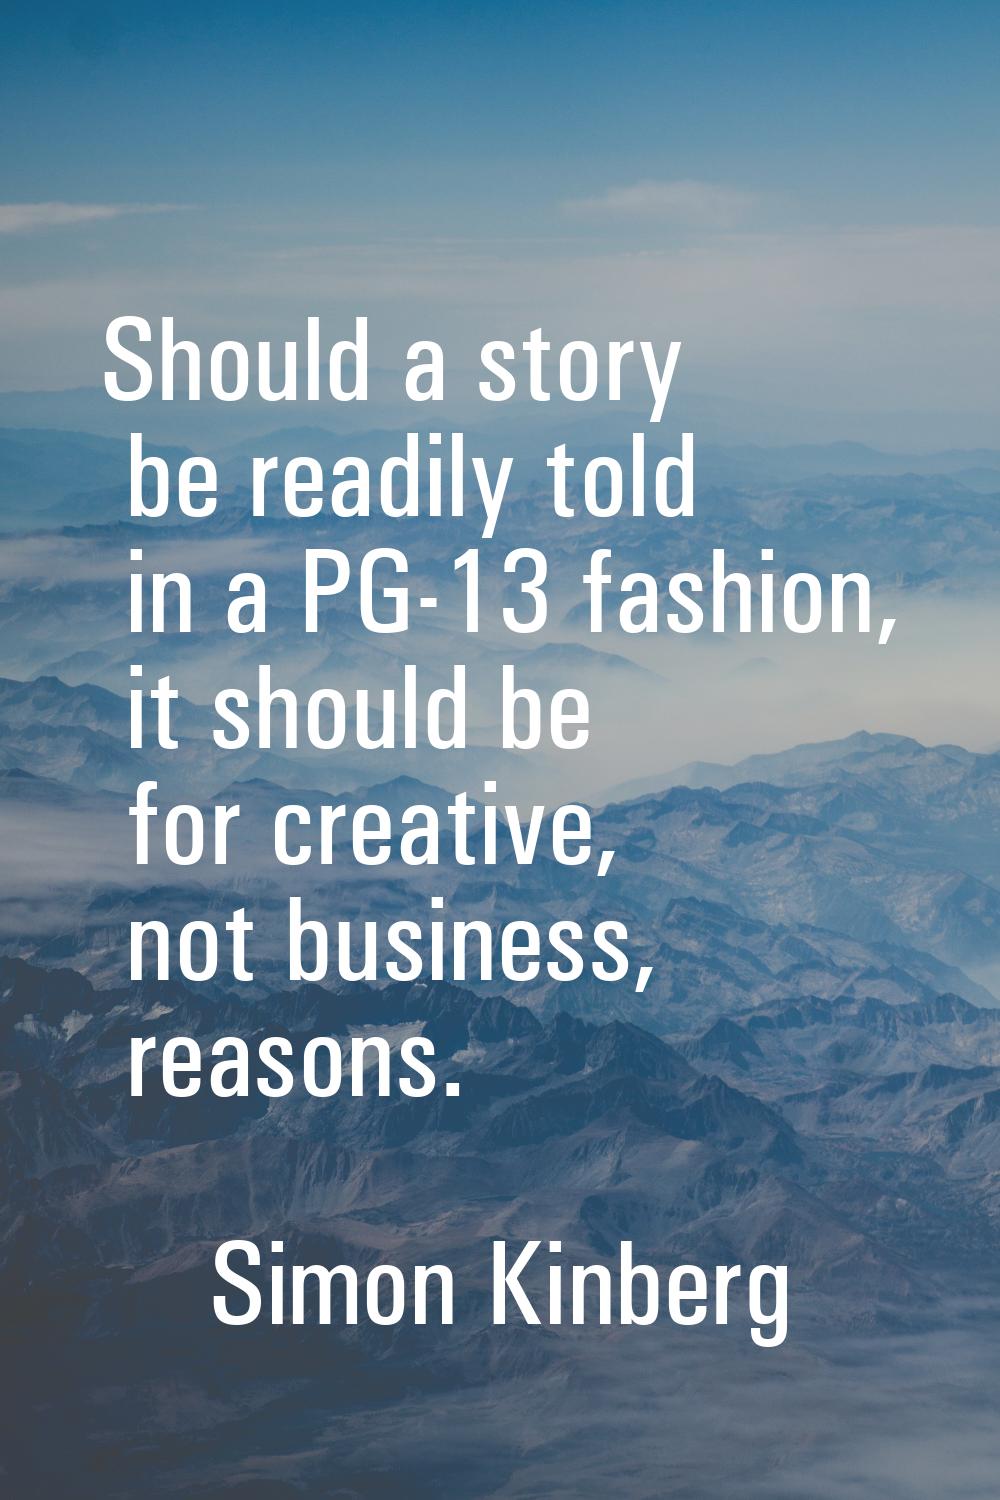 Should a story be readily told in a PG-13 fashion, it should be for creative, not business, reasons